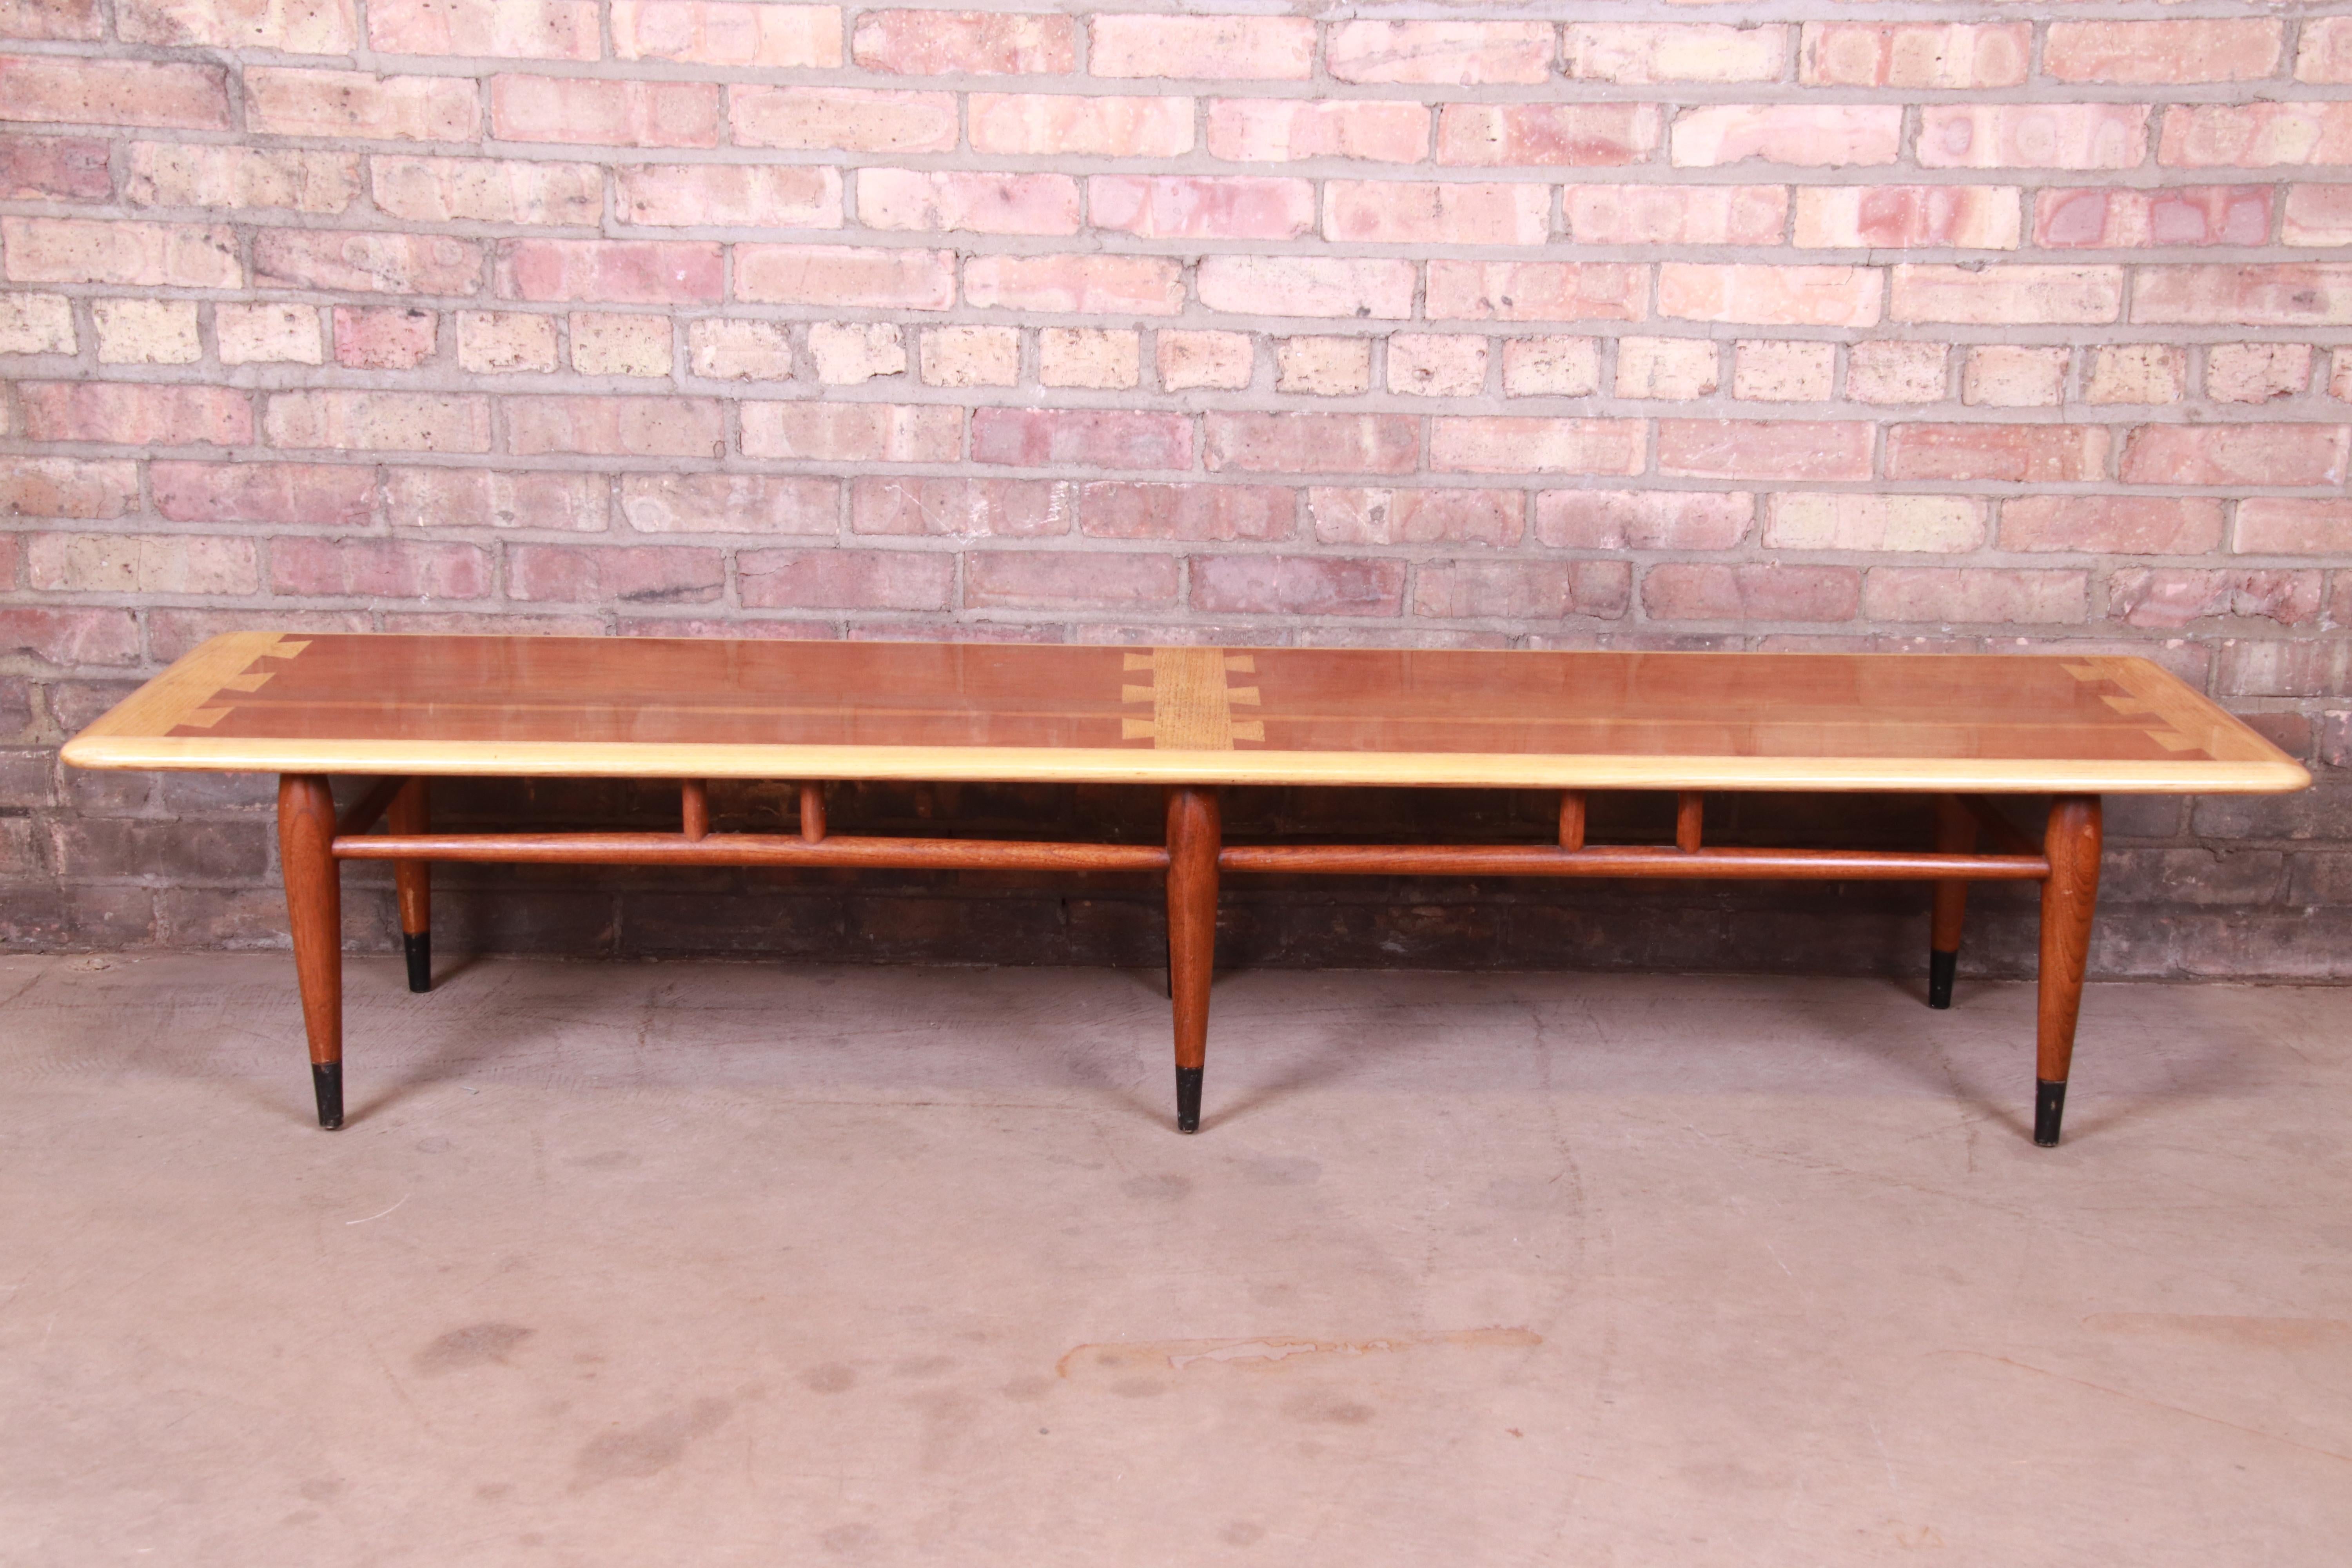 An exceptional Mid-Century Modern extra long surfboard coffee table

Designed by Andre Bus for Lane Furniture 